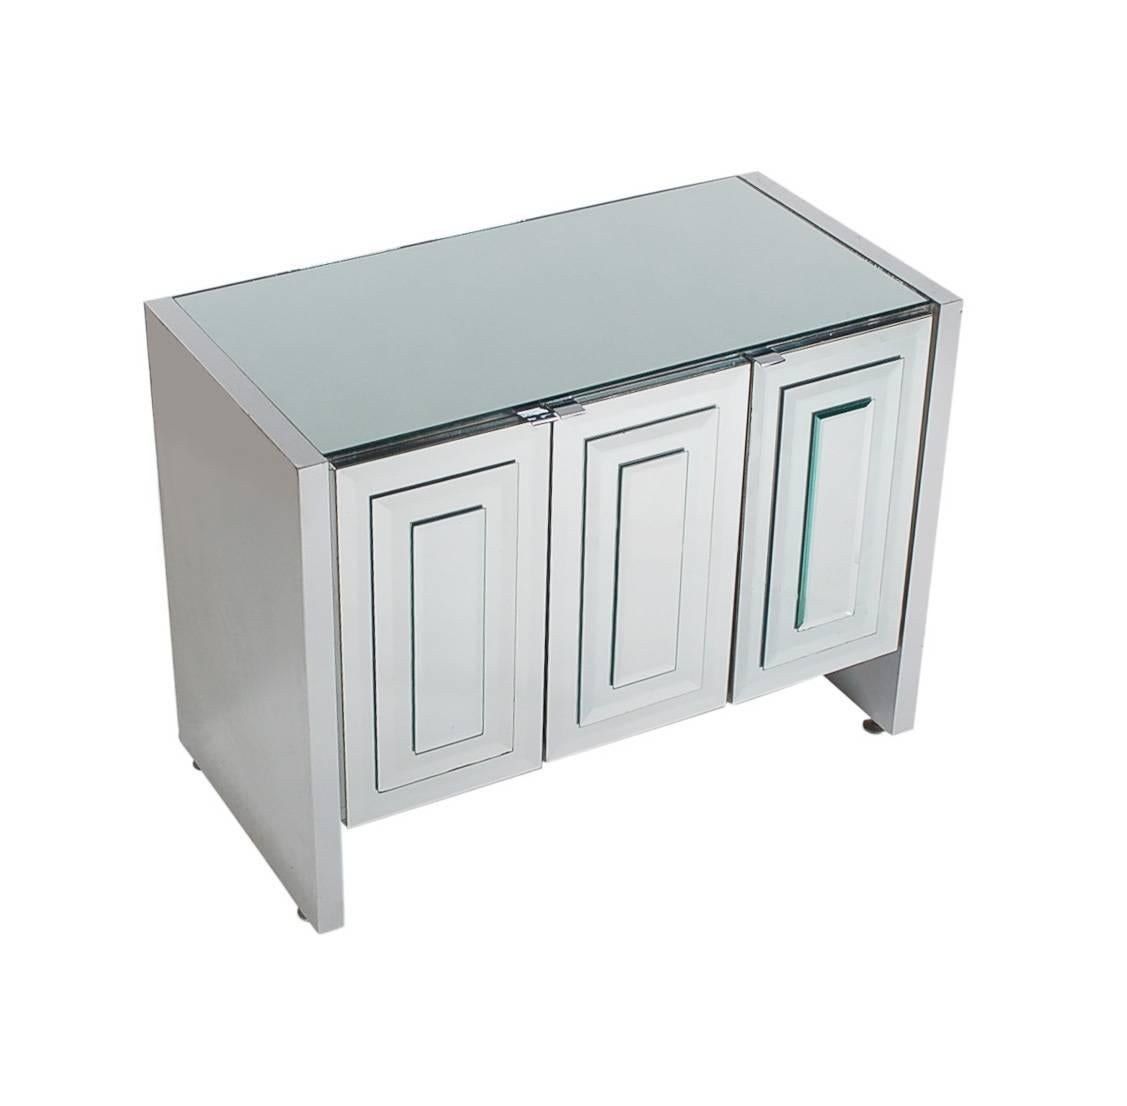 A chic and glamorous mirrored three-door cabinet made by Ello. It features Art Deco Mirror stacked doors with chrome trim. Interior is off-white laminate. 

In the style of: Pierre Cardin, Mastercraft, Paul Evans, Hollywood Regency.